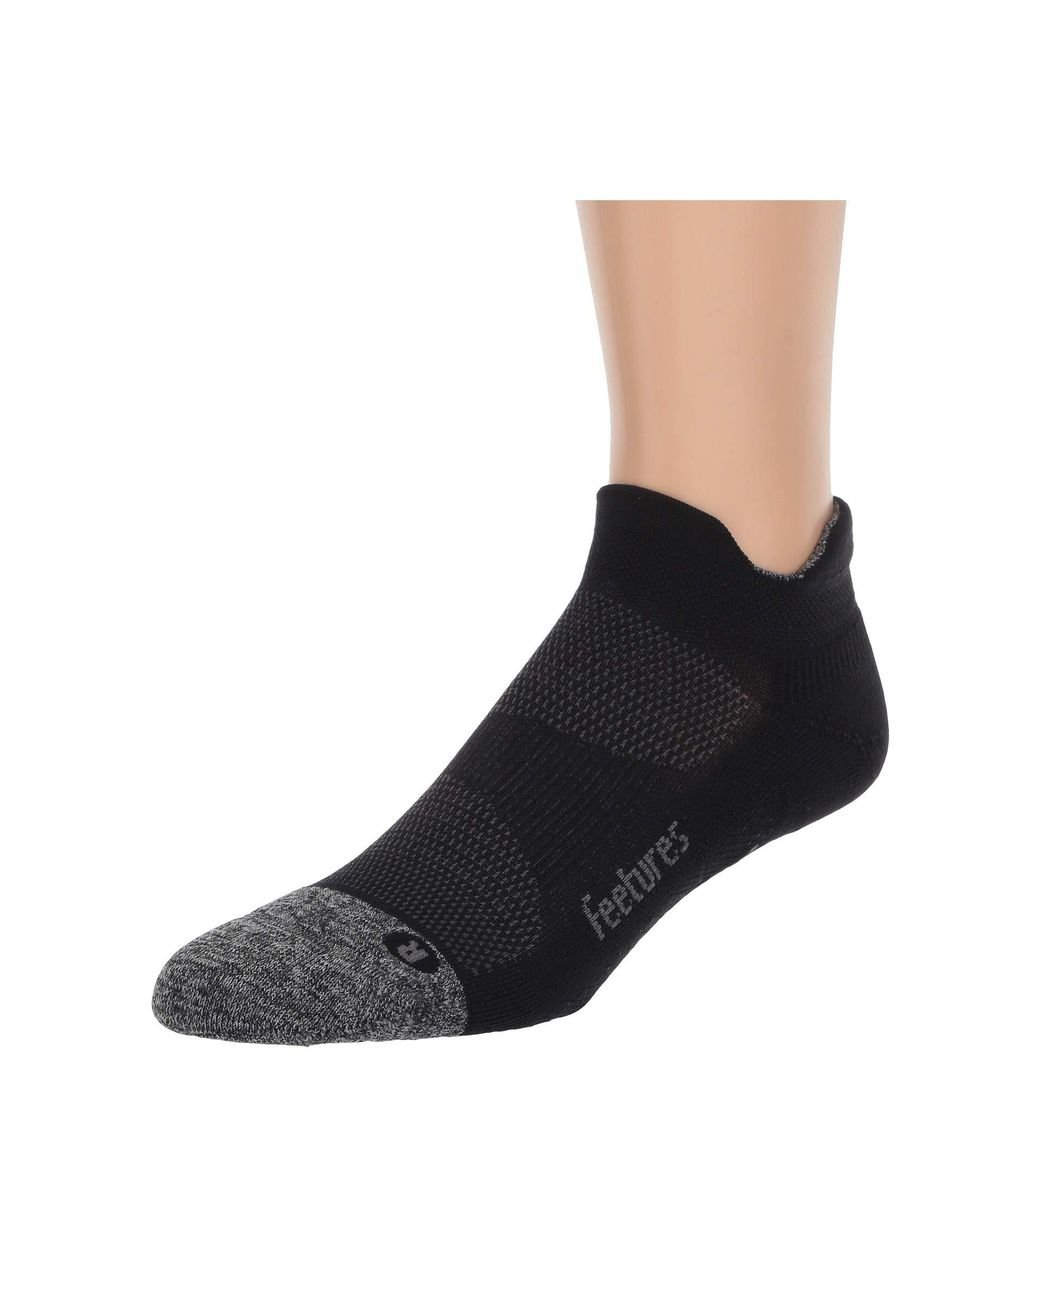 Feetures Synthetic Elite Light Cushion No Show Tab in Black - Lyst